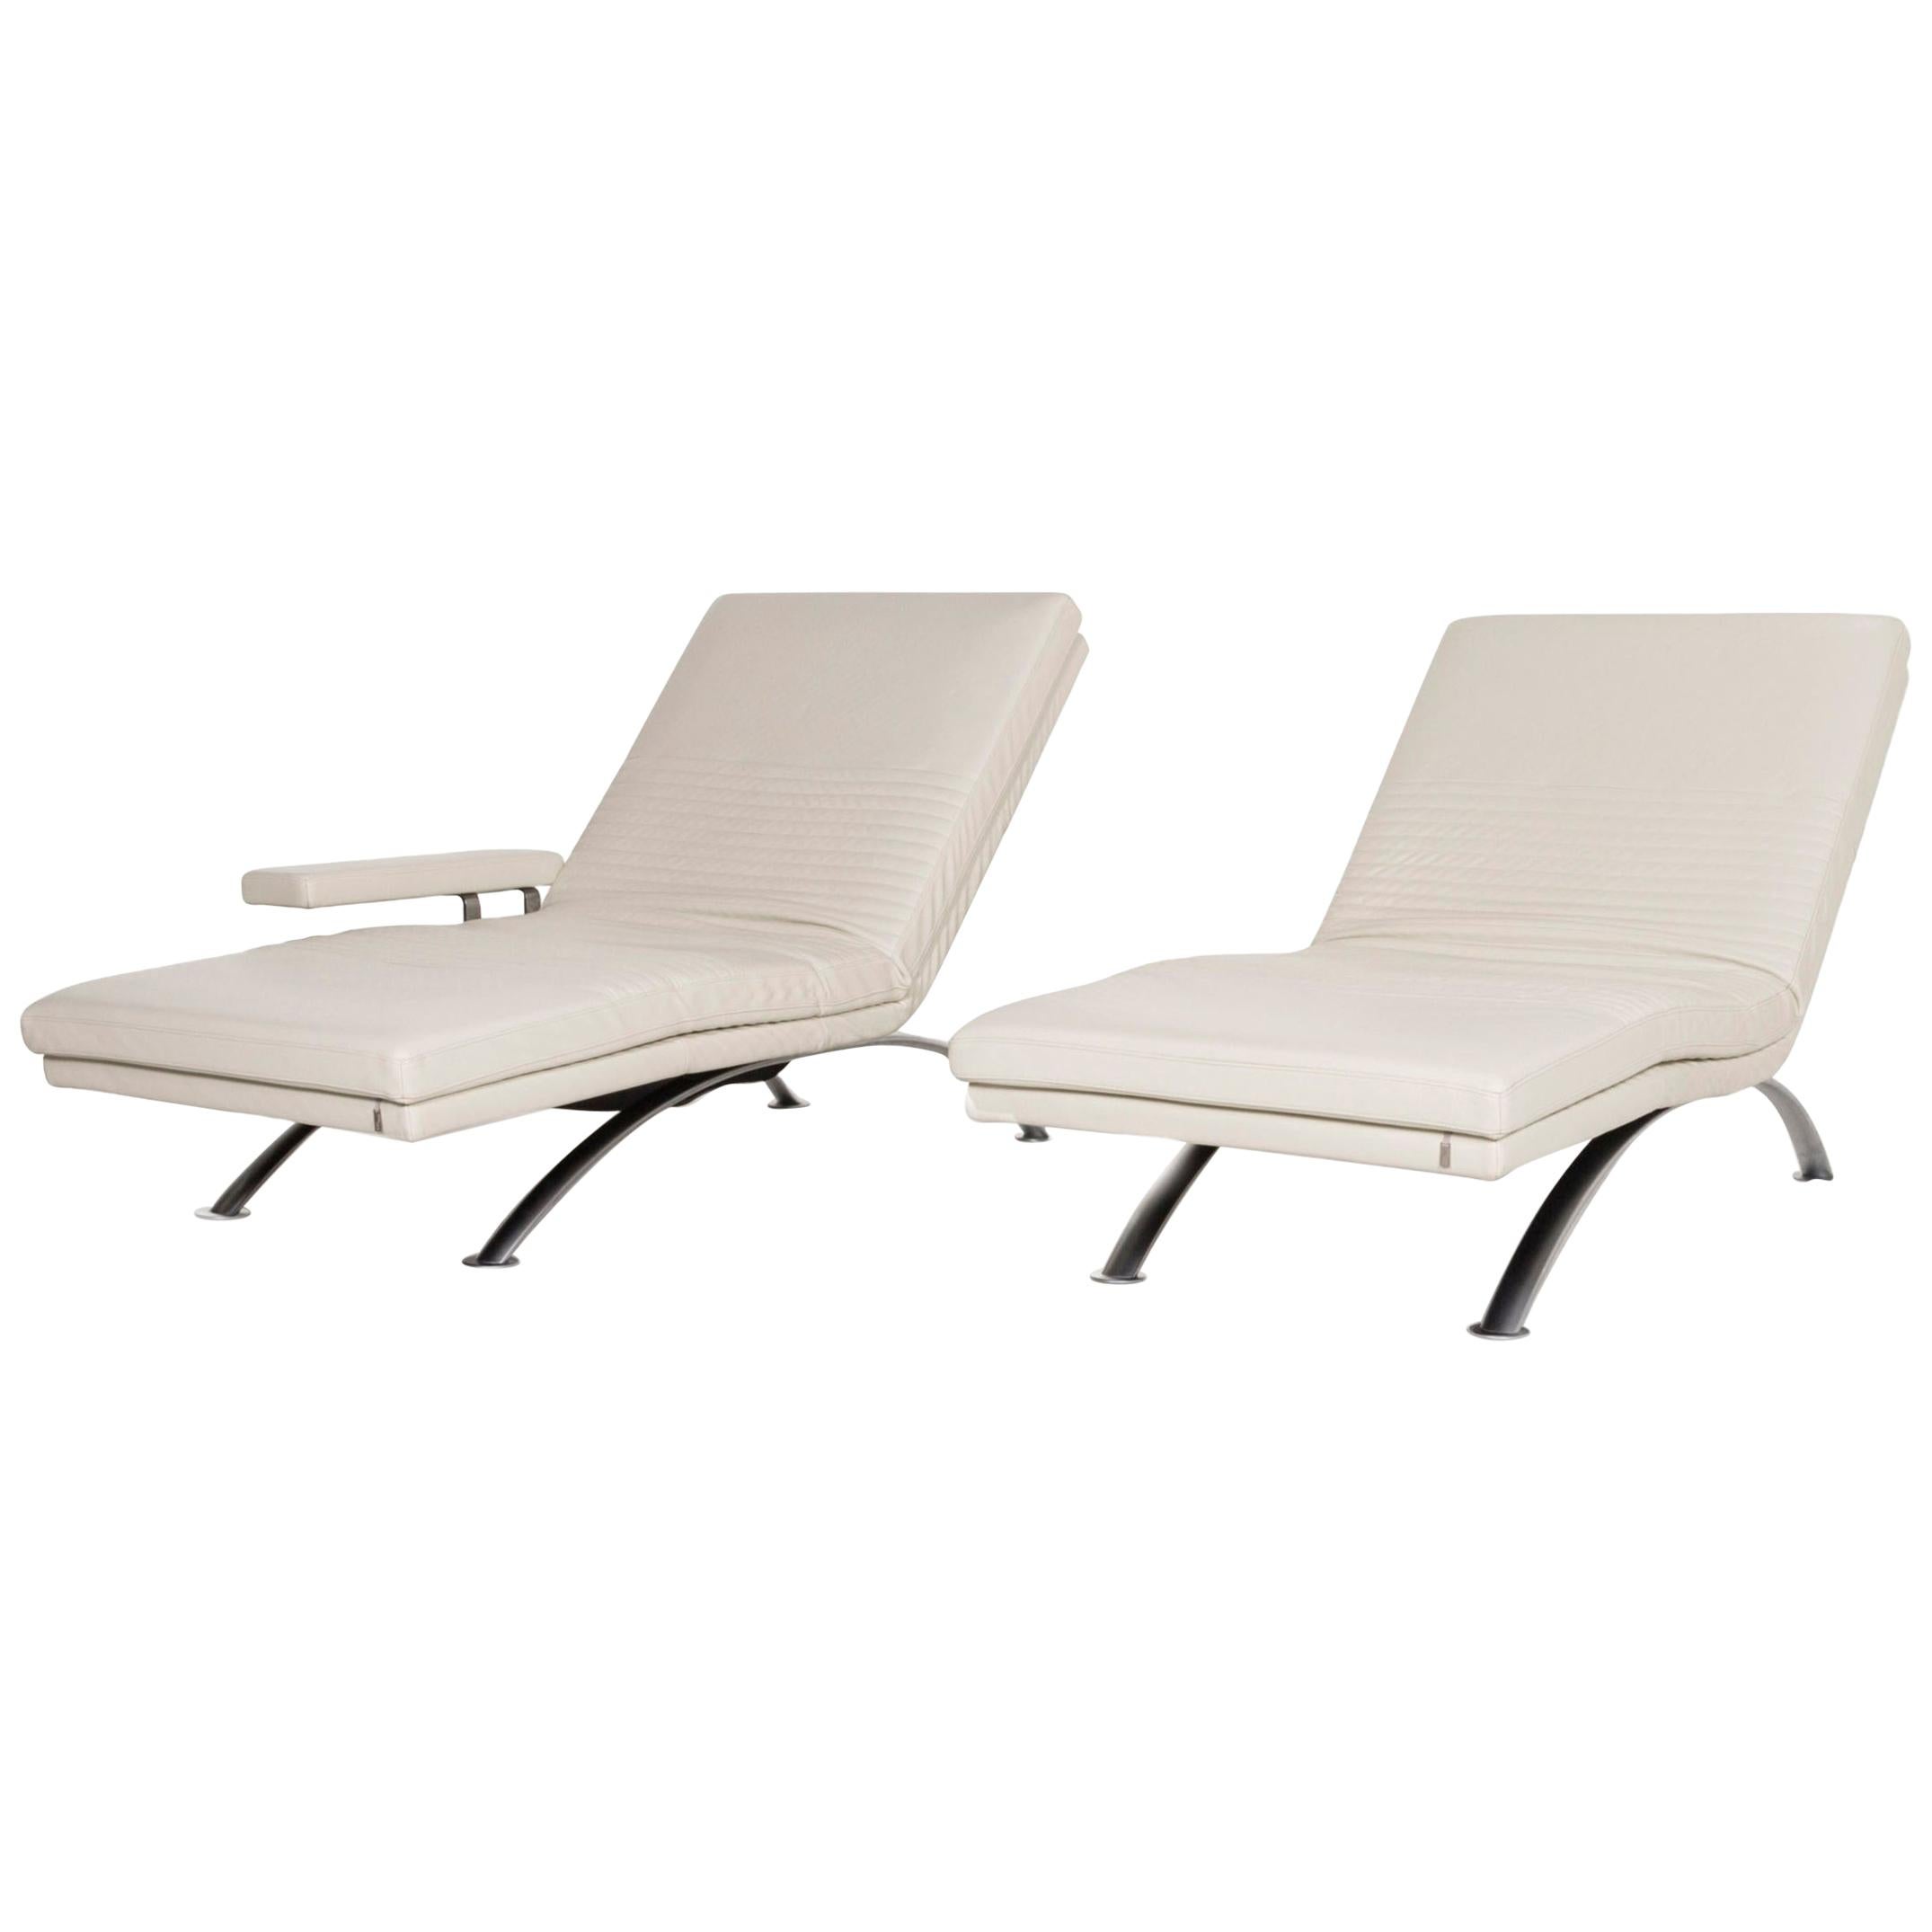 Three-Point Leather Lounger Cream Function Relax Function Sleep Function 2 For Sale